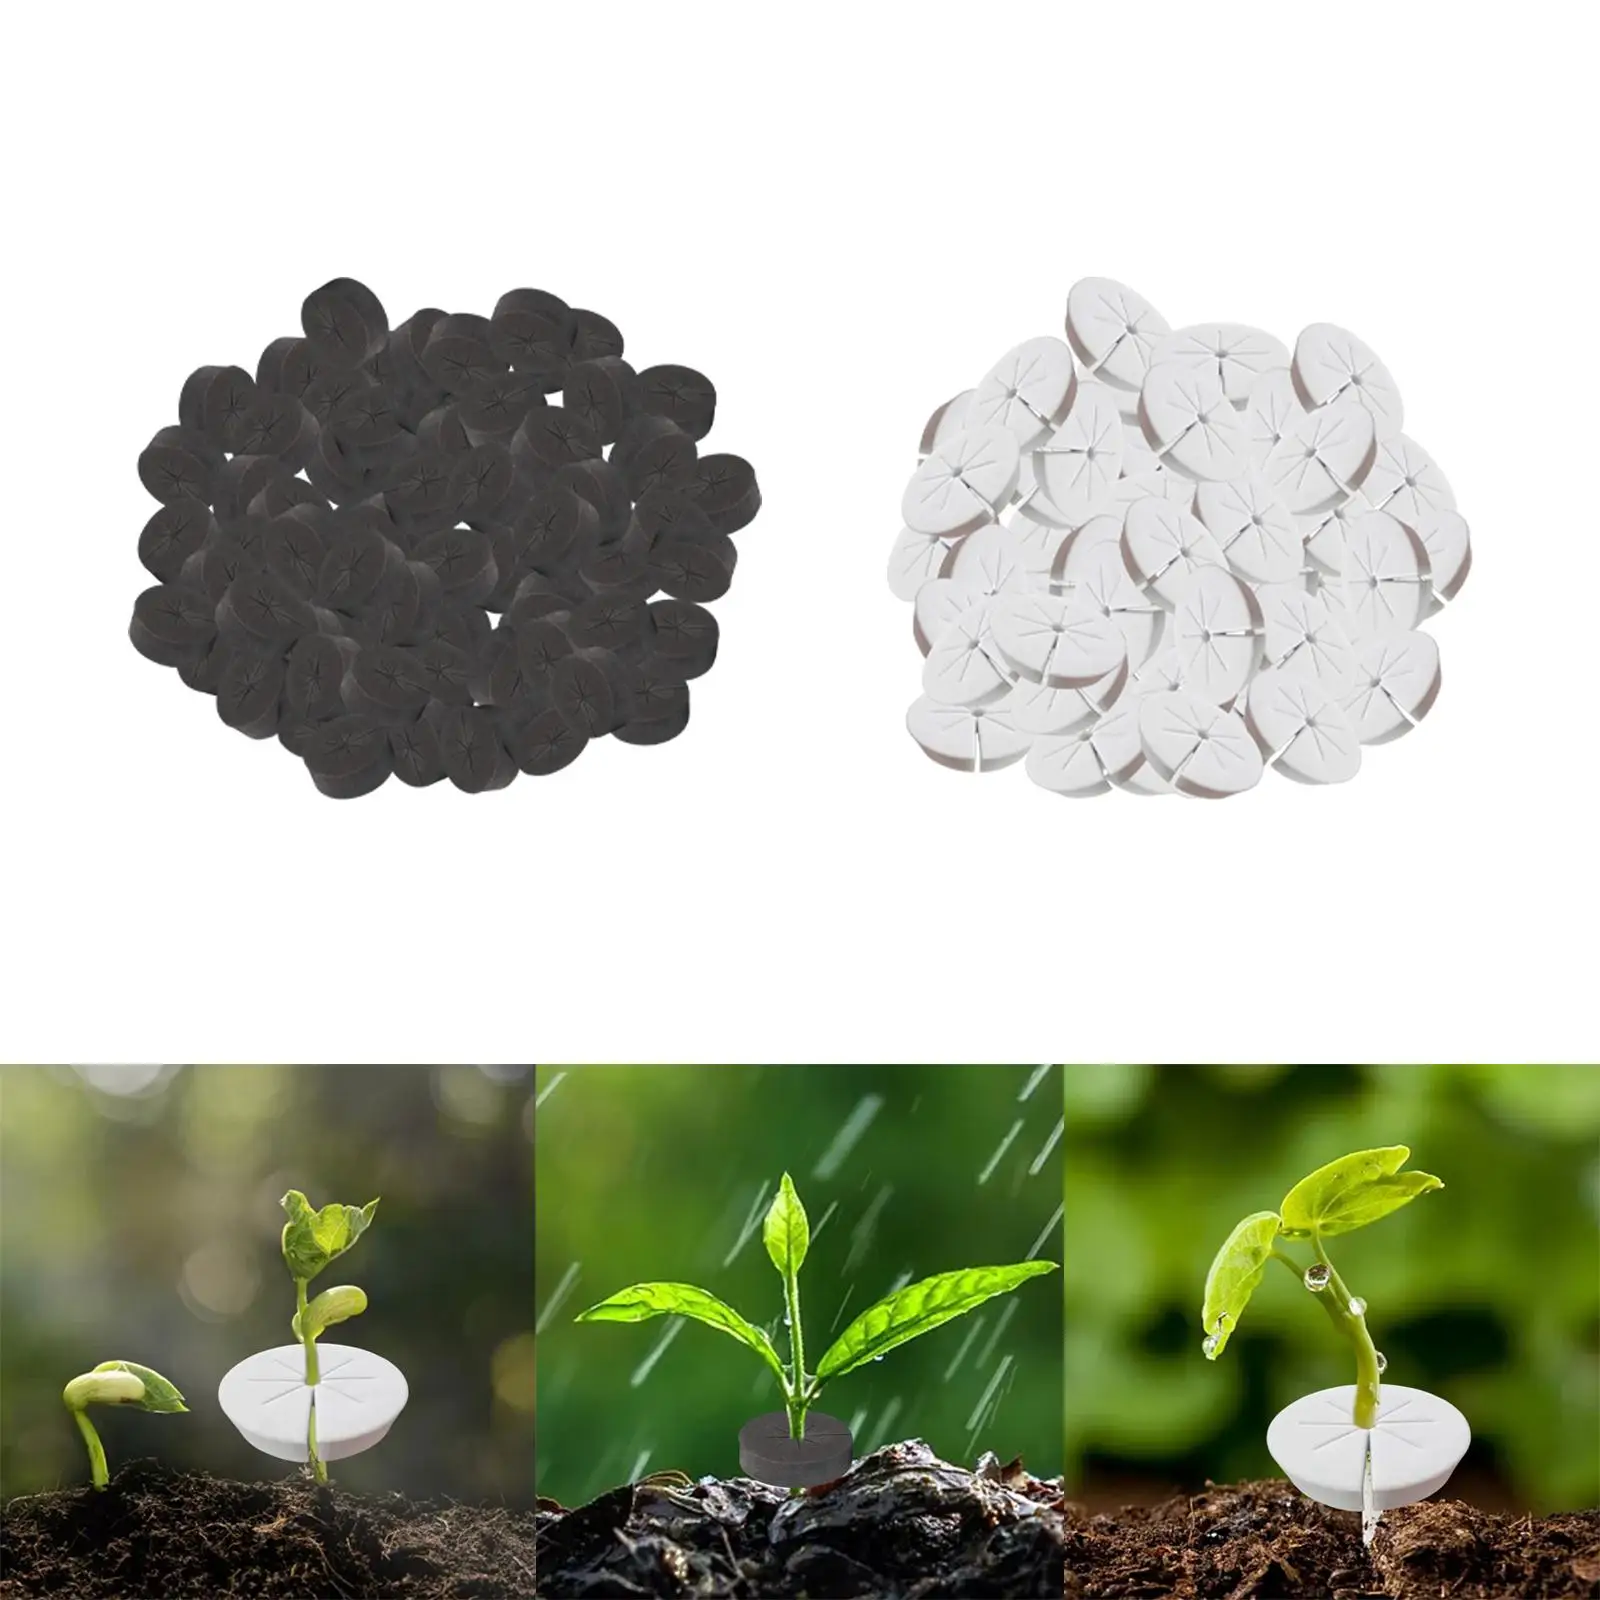 Plants Roots Fixed Sponge Soft Inserts Moisturized for Soilless Cultivation Home DIY Vegetable Planting Agriculture Garden Beans